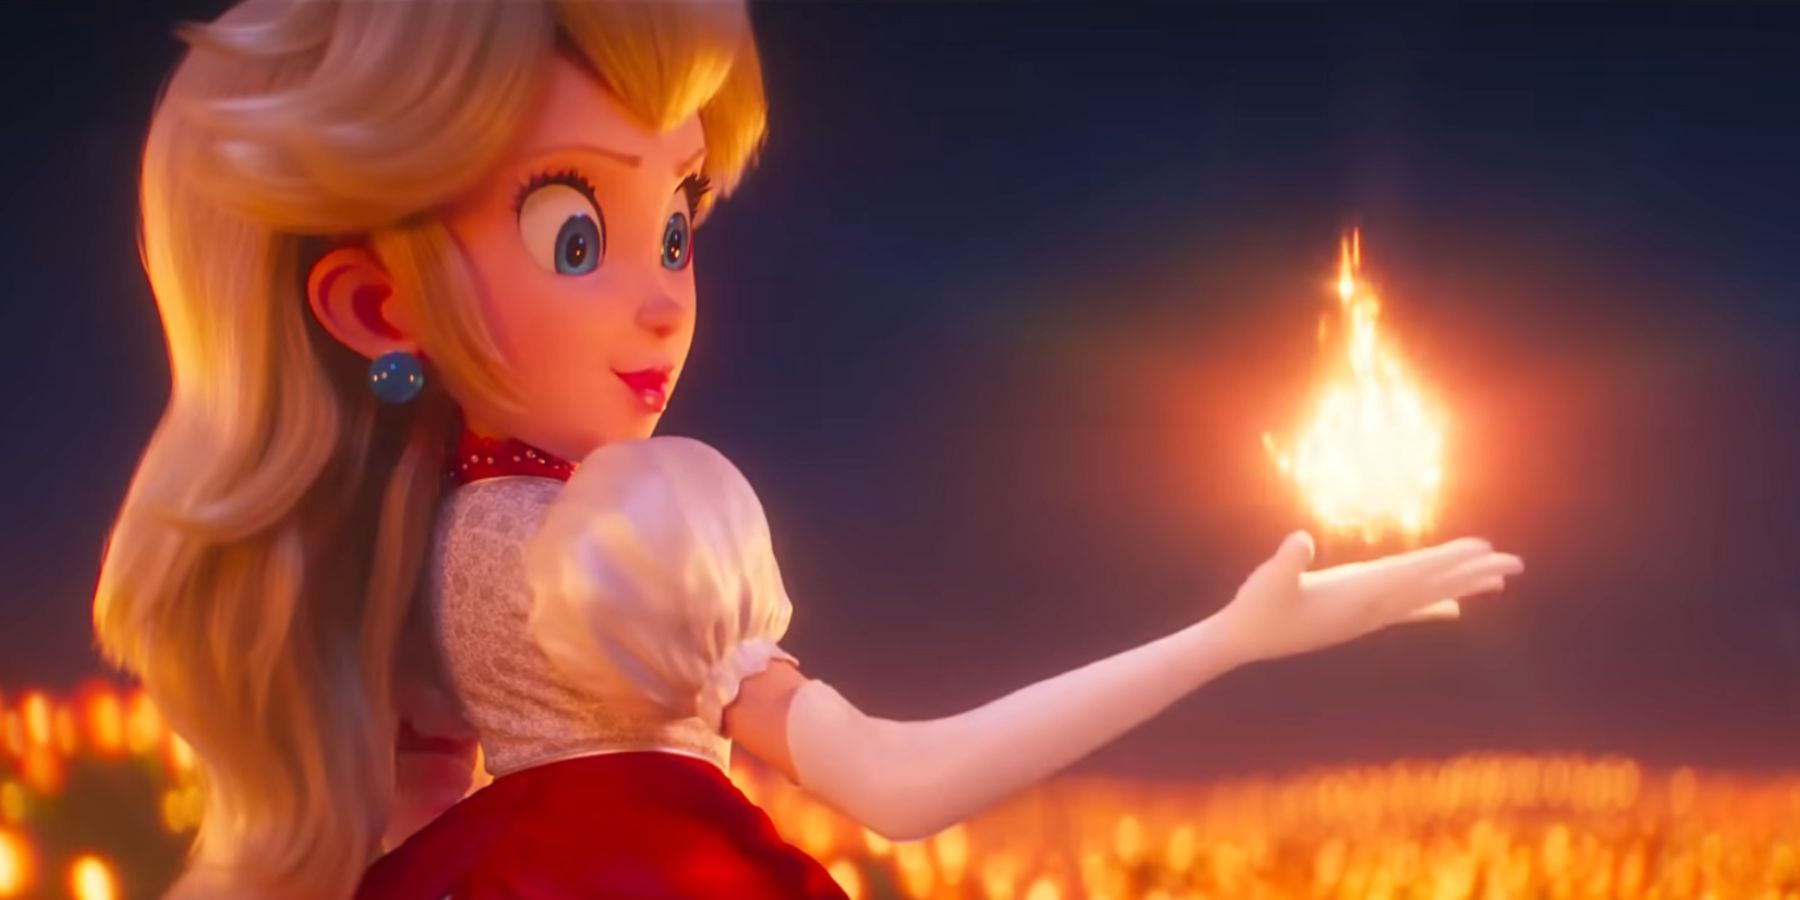 Princess Peach holds fire in the palm of her hand in the animated Super Mario Movie.